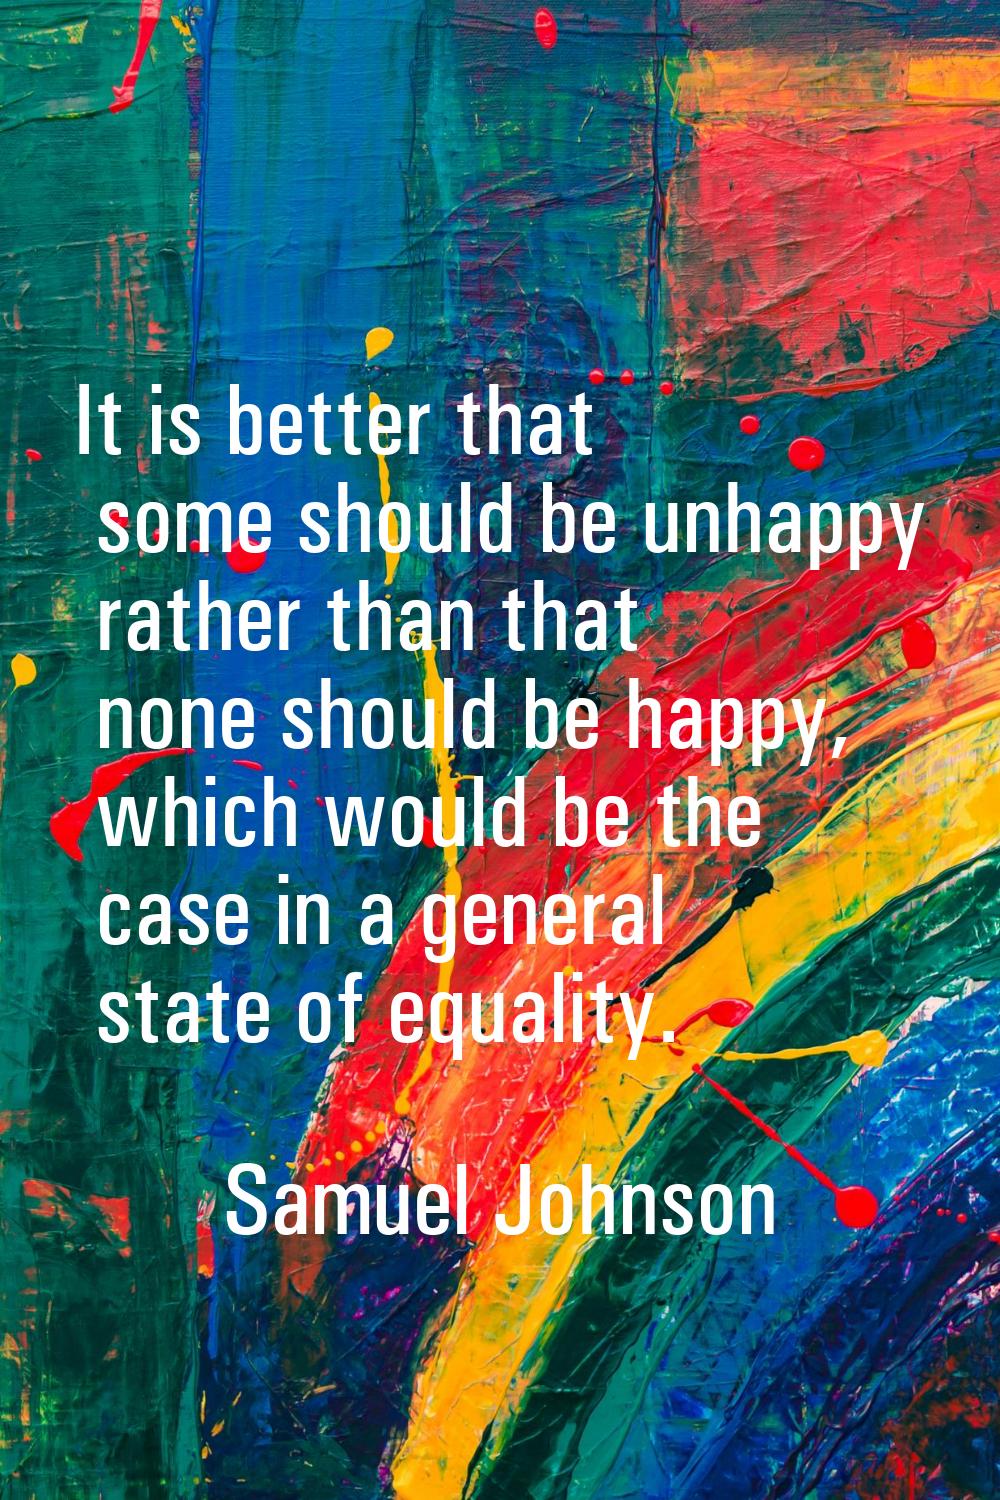 It is better that some should be unhappy rather than that none should be happy, which would be the 